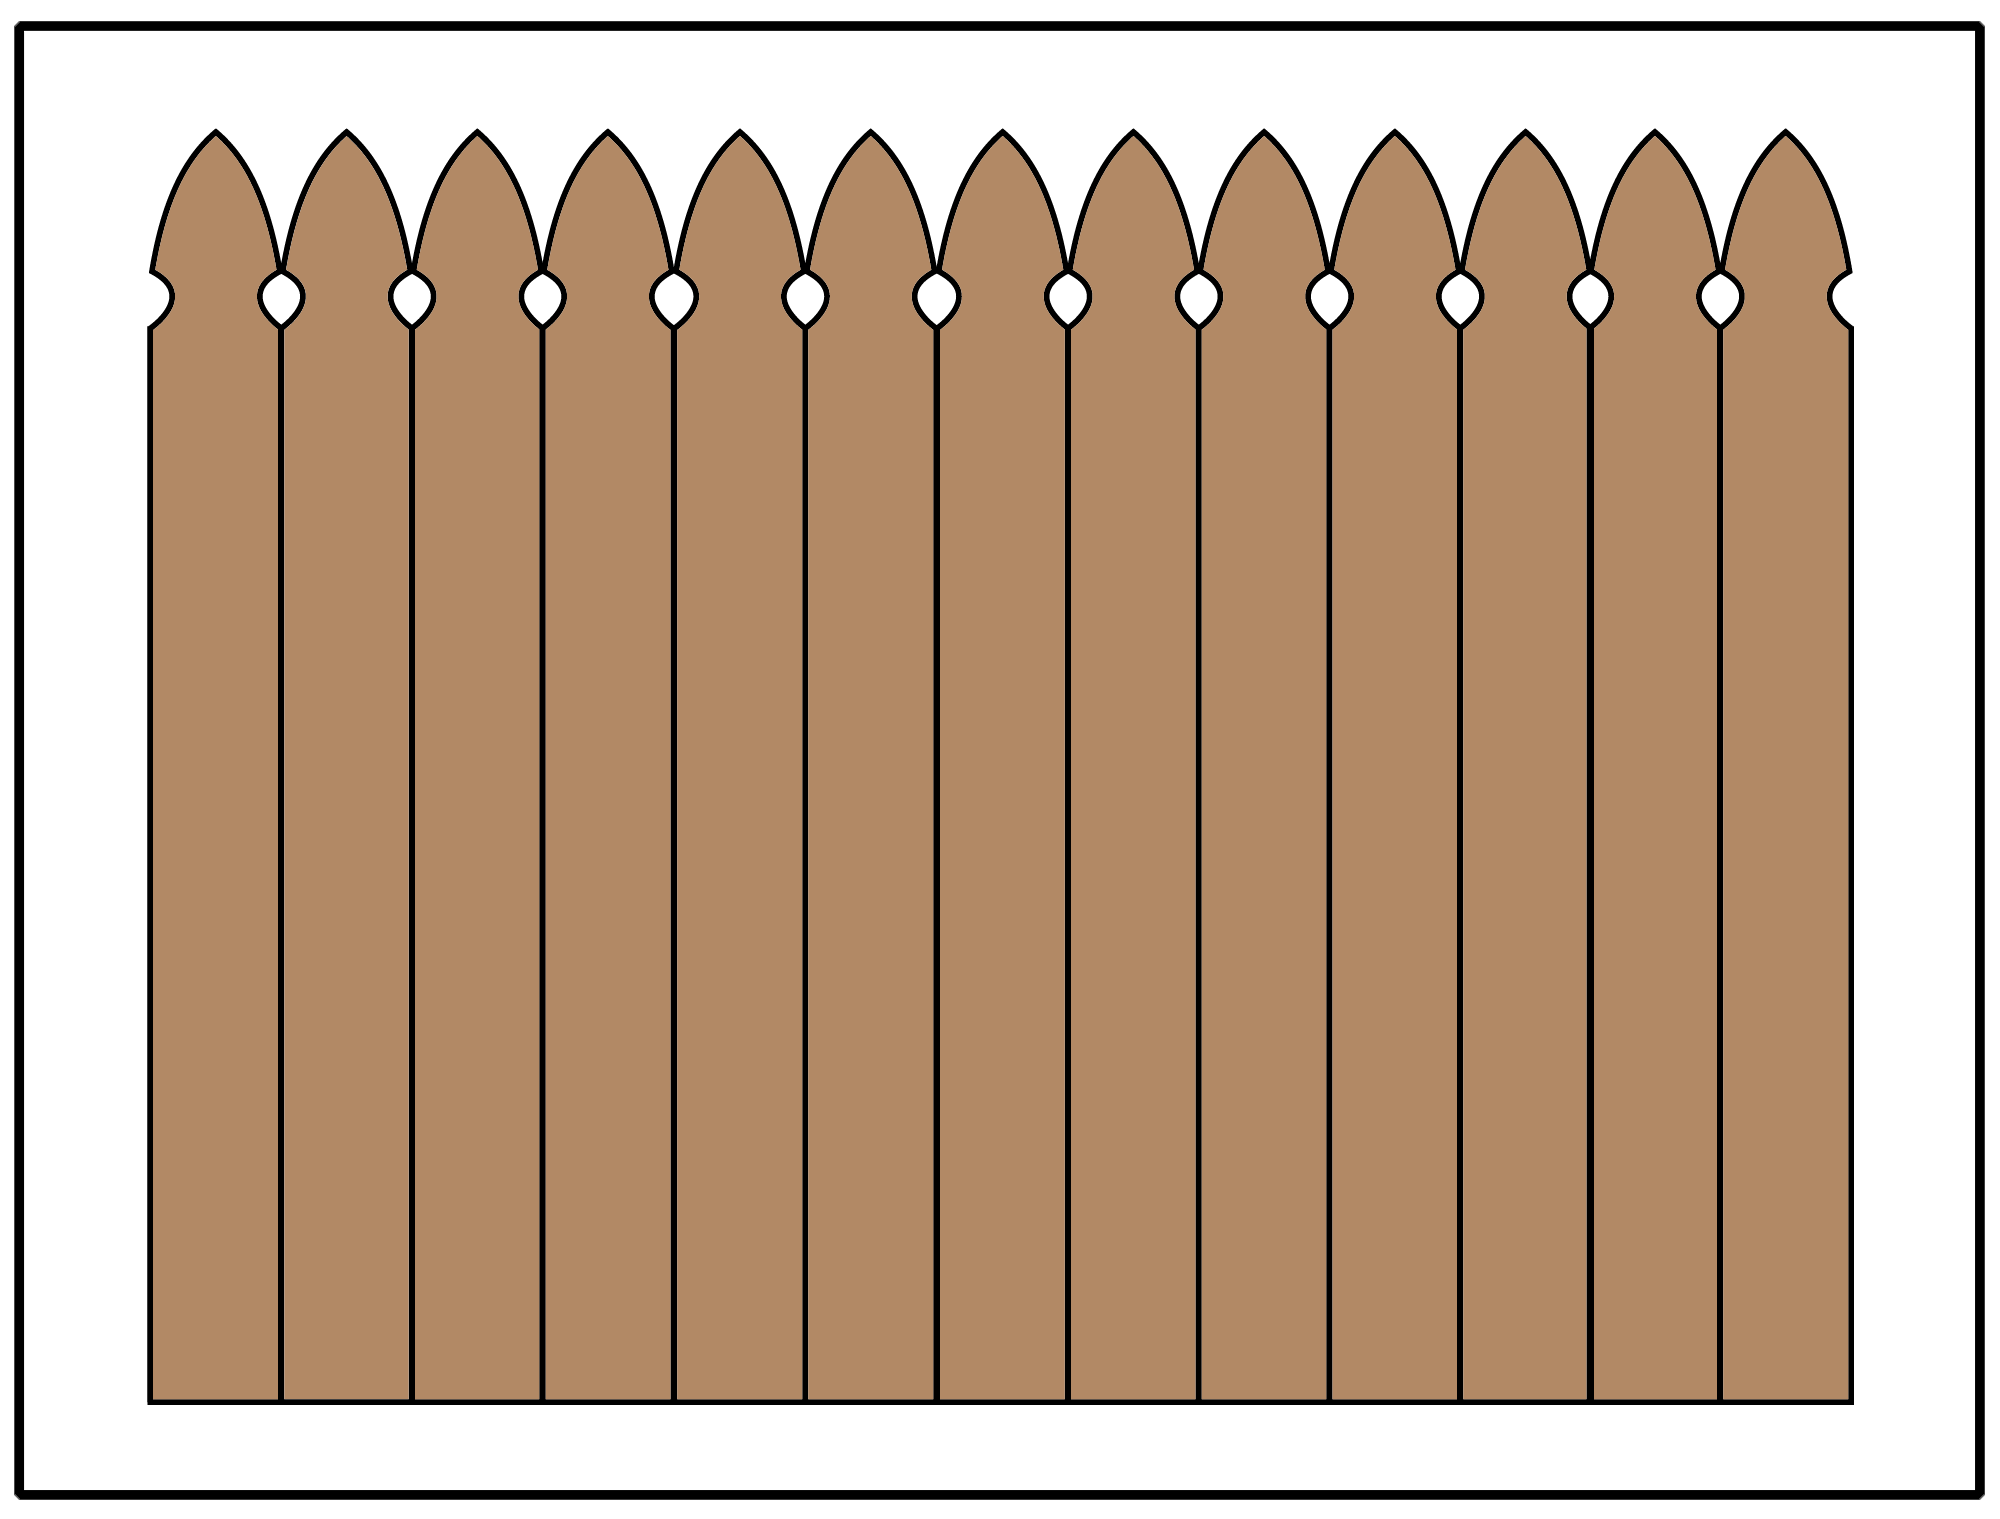 Illustration of a privacy fence using a gothic picket